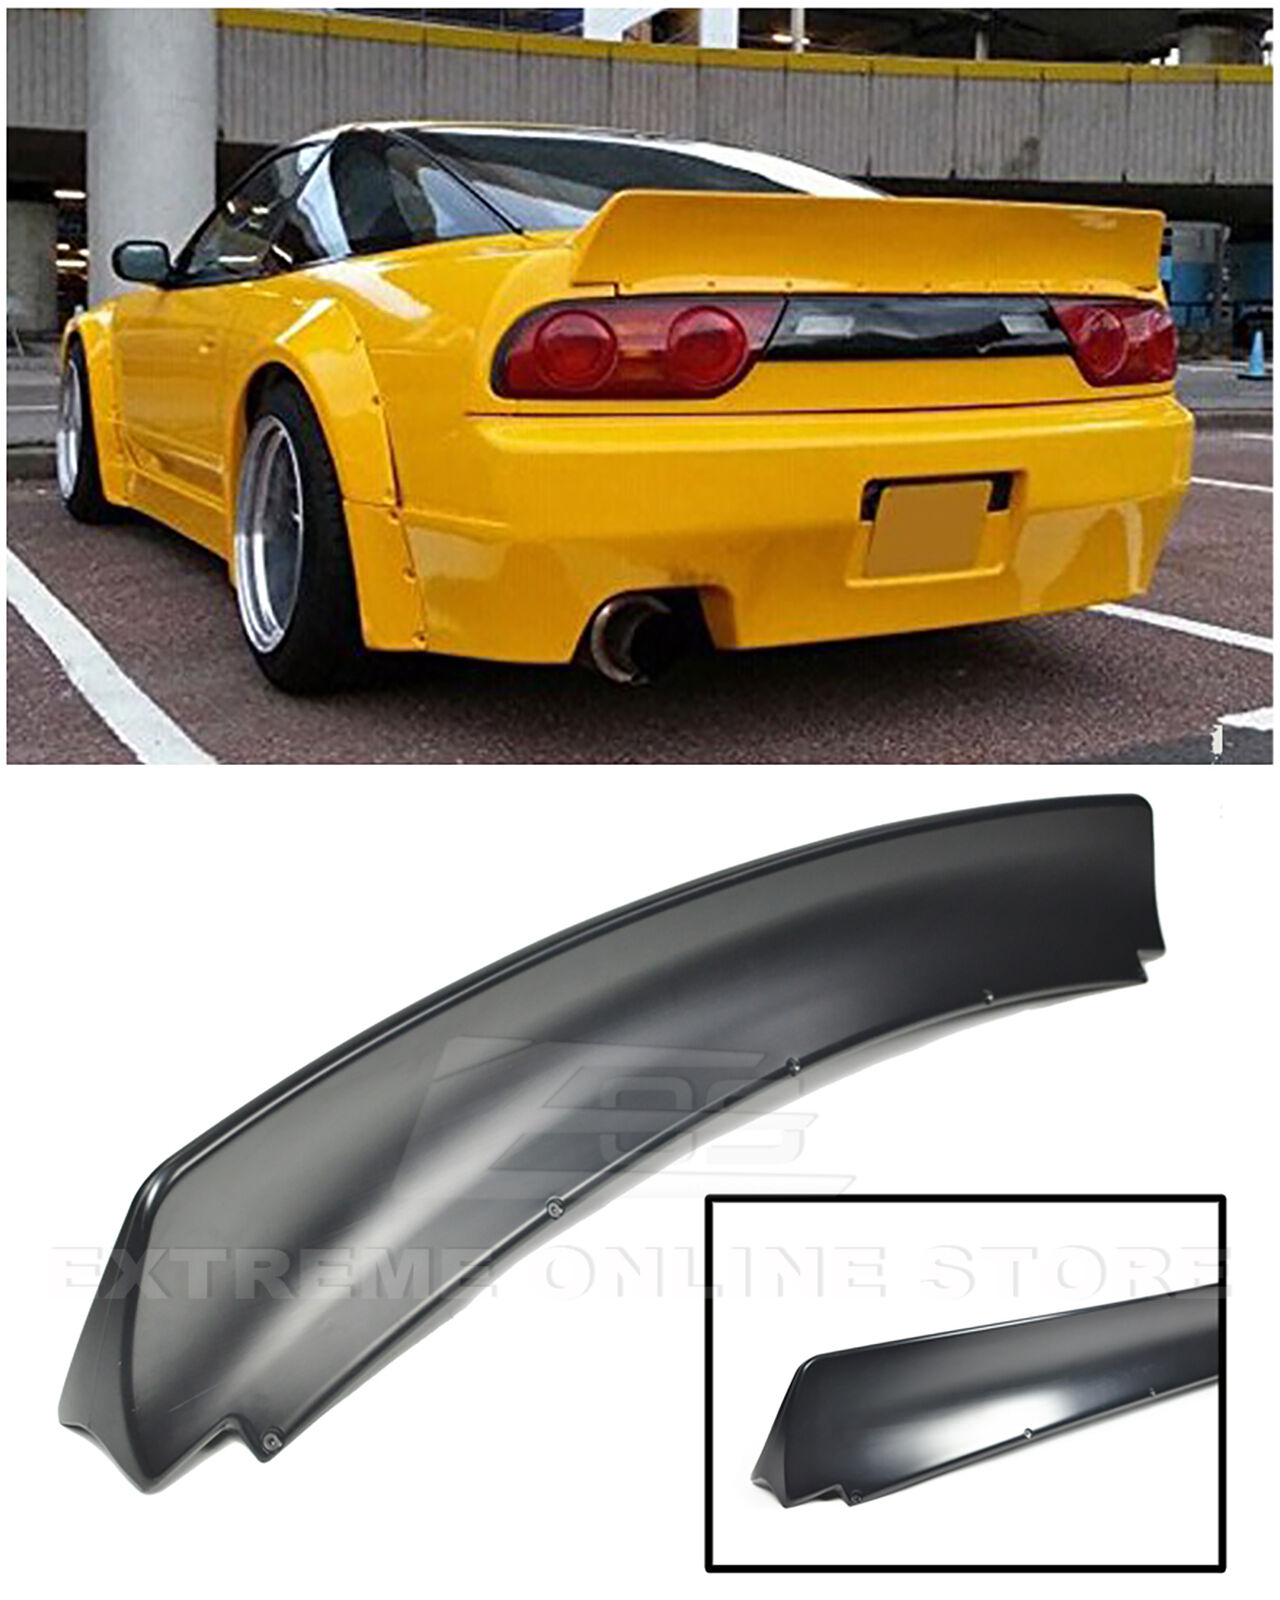 EOS RB Style Rear Trunk Lid Wing Spoiler For 89-94 Nissan 240SX S13 Hatchback